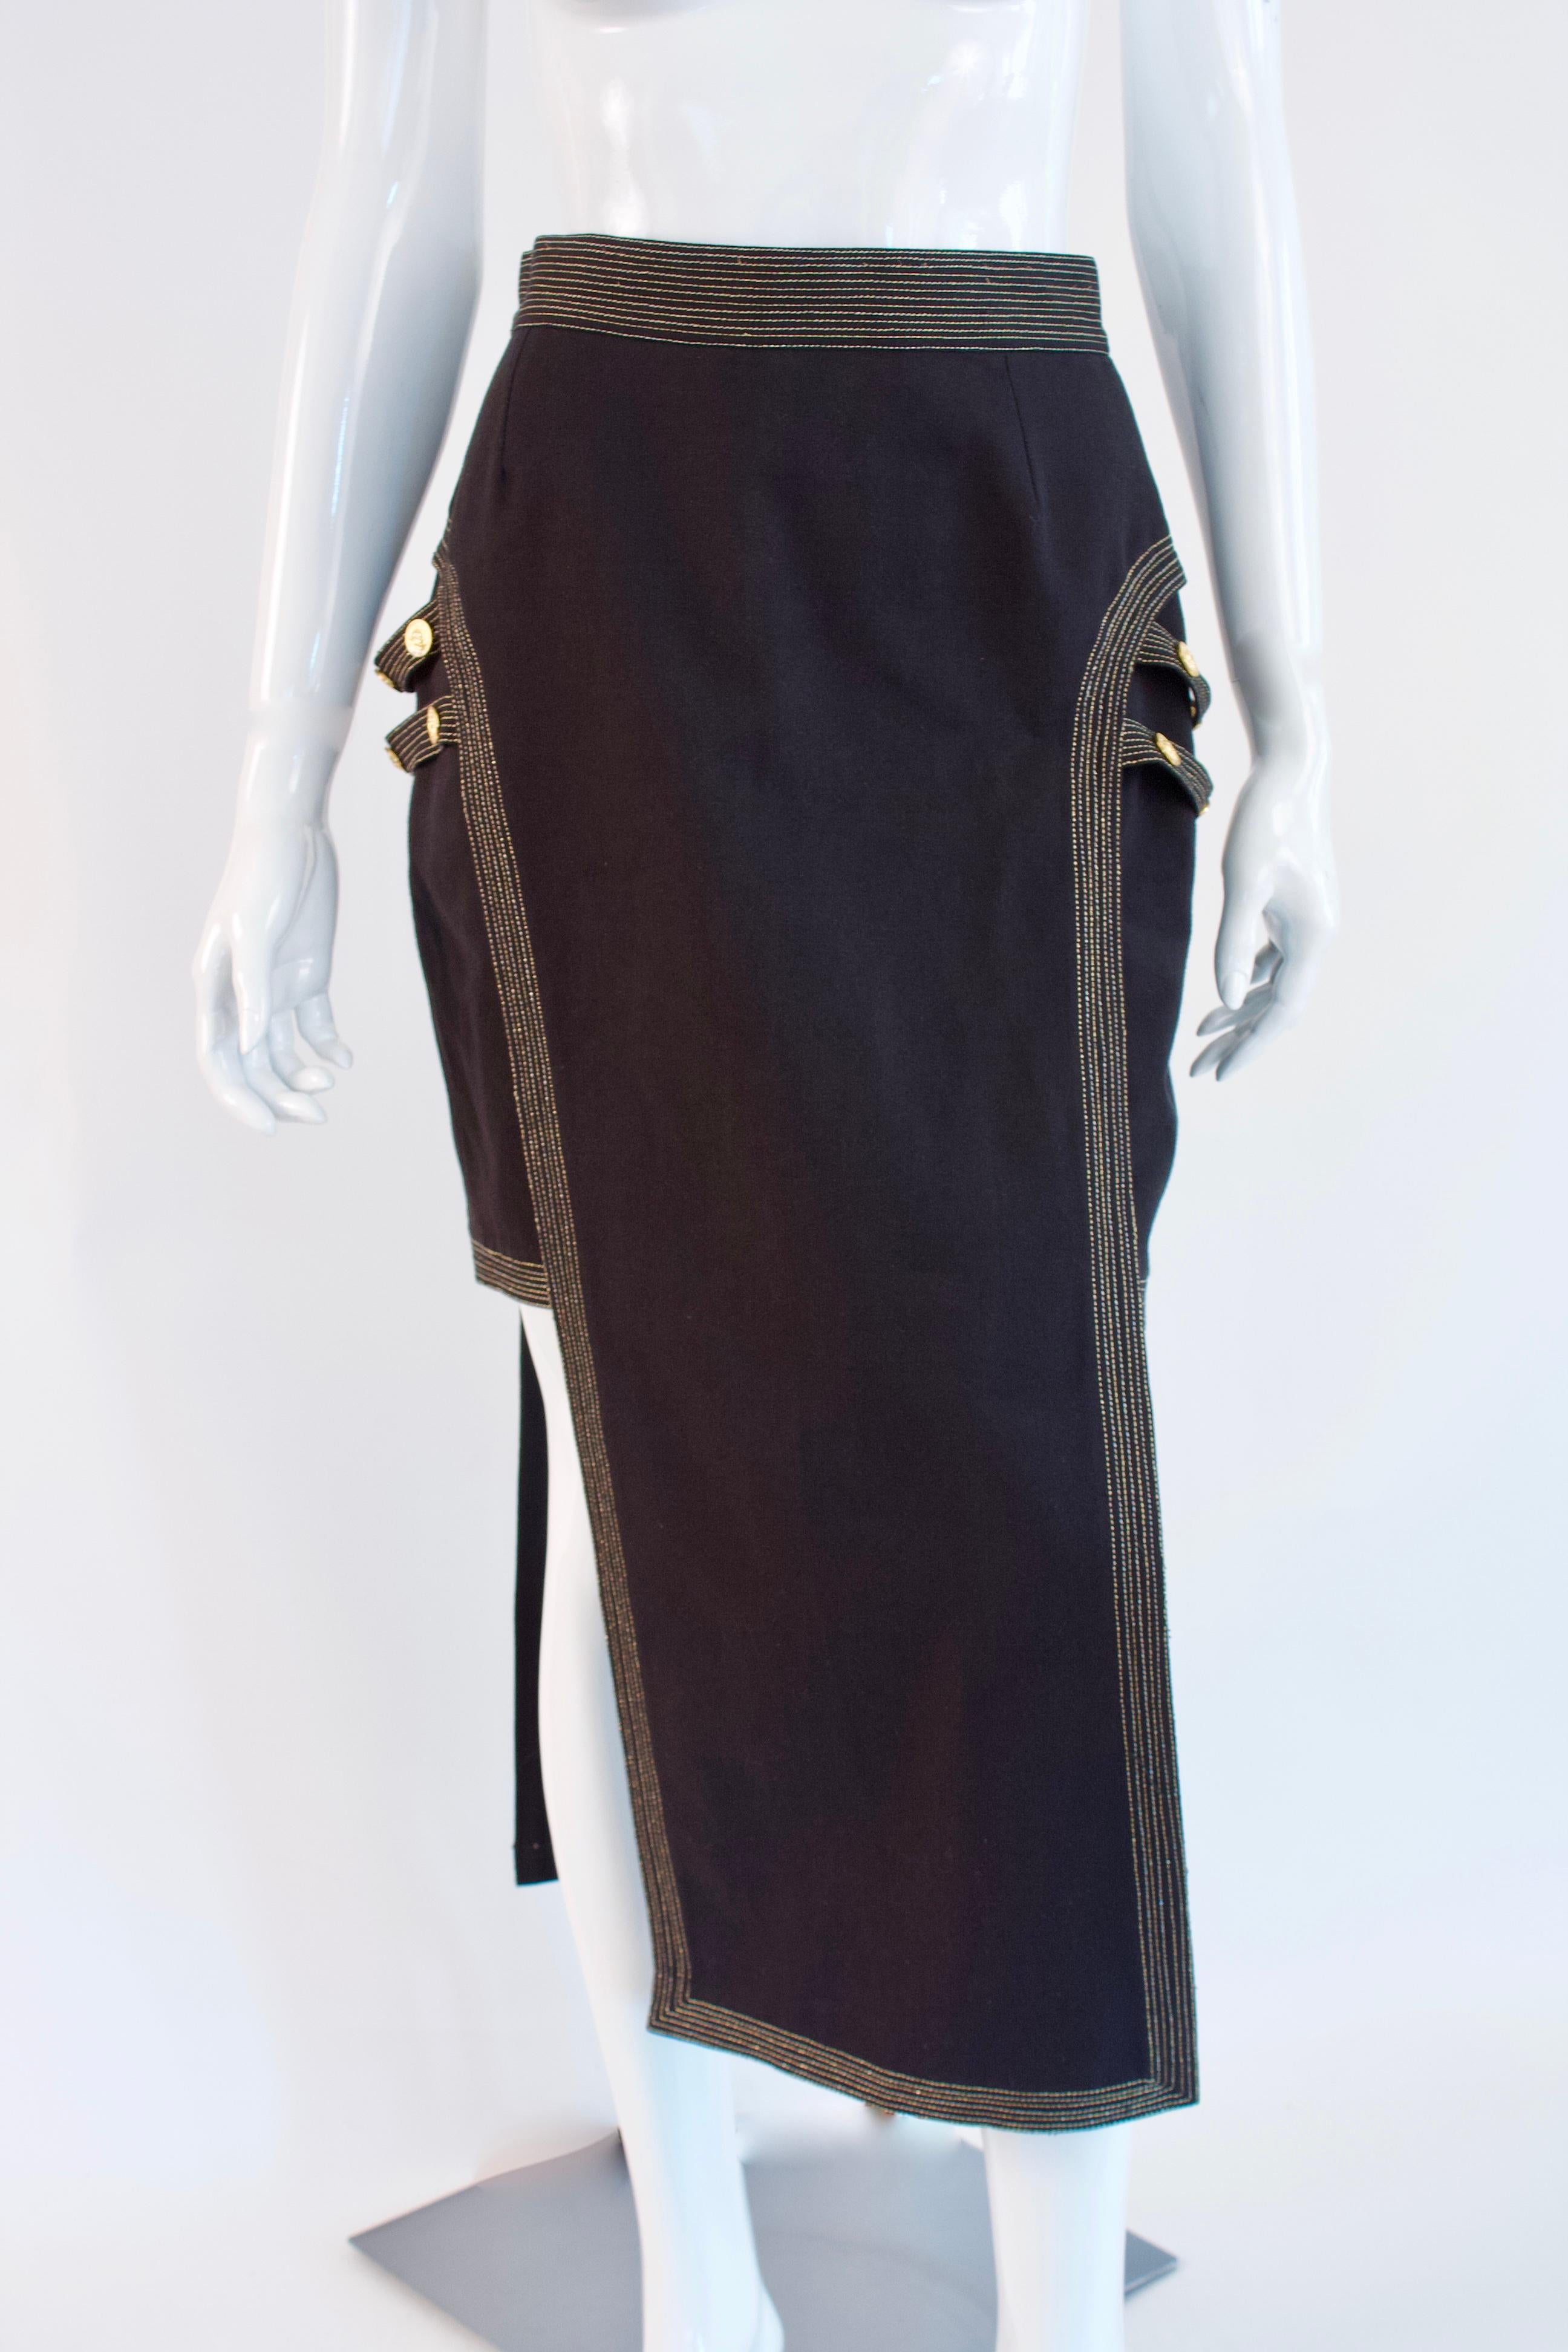 Rare Vintage GIANNI VERSACE Short Long Bondage Skirt.  This incredible Versace skirt features gold lion head buttons and bondage accents.  It's love.

 Designer: Gianni Versace Versus

Condition: Excellent

Size: fits like a small-medium,